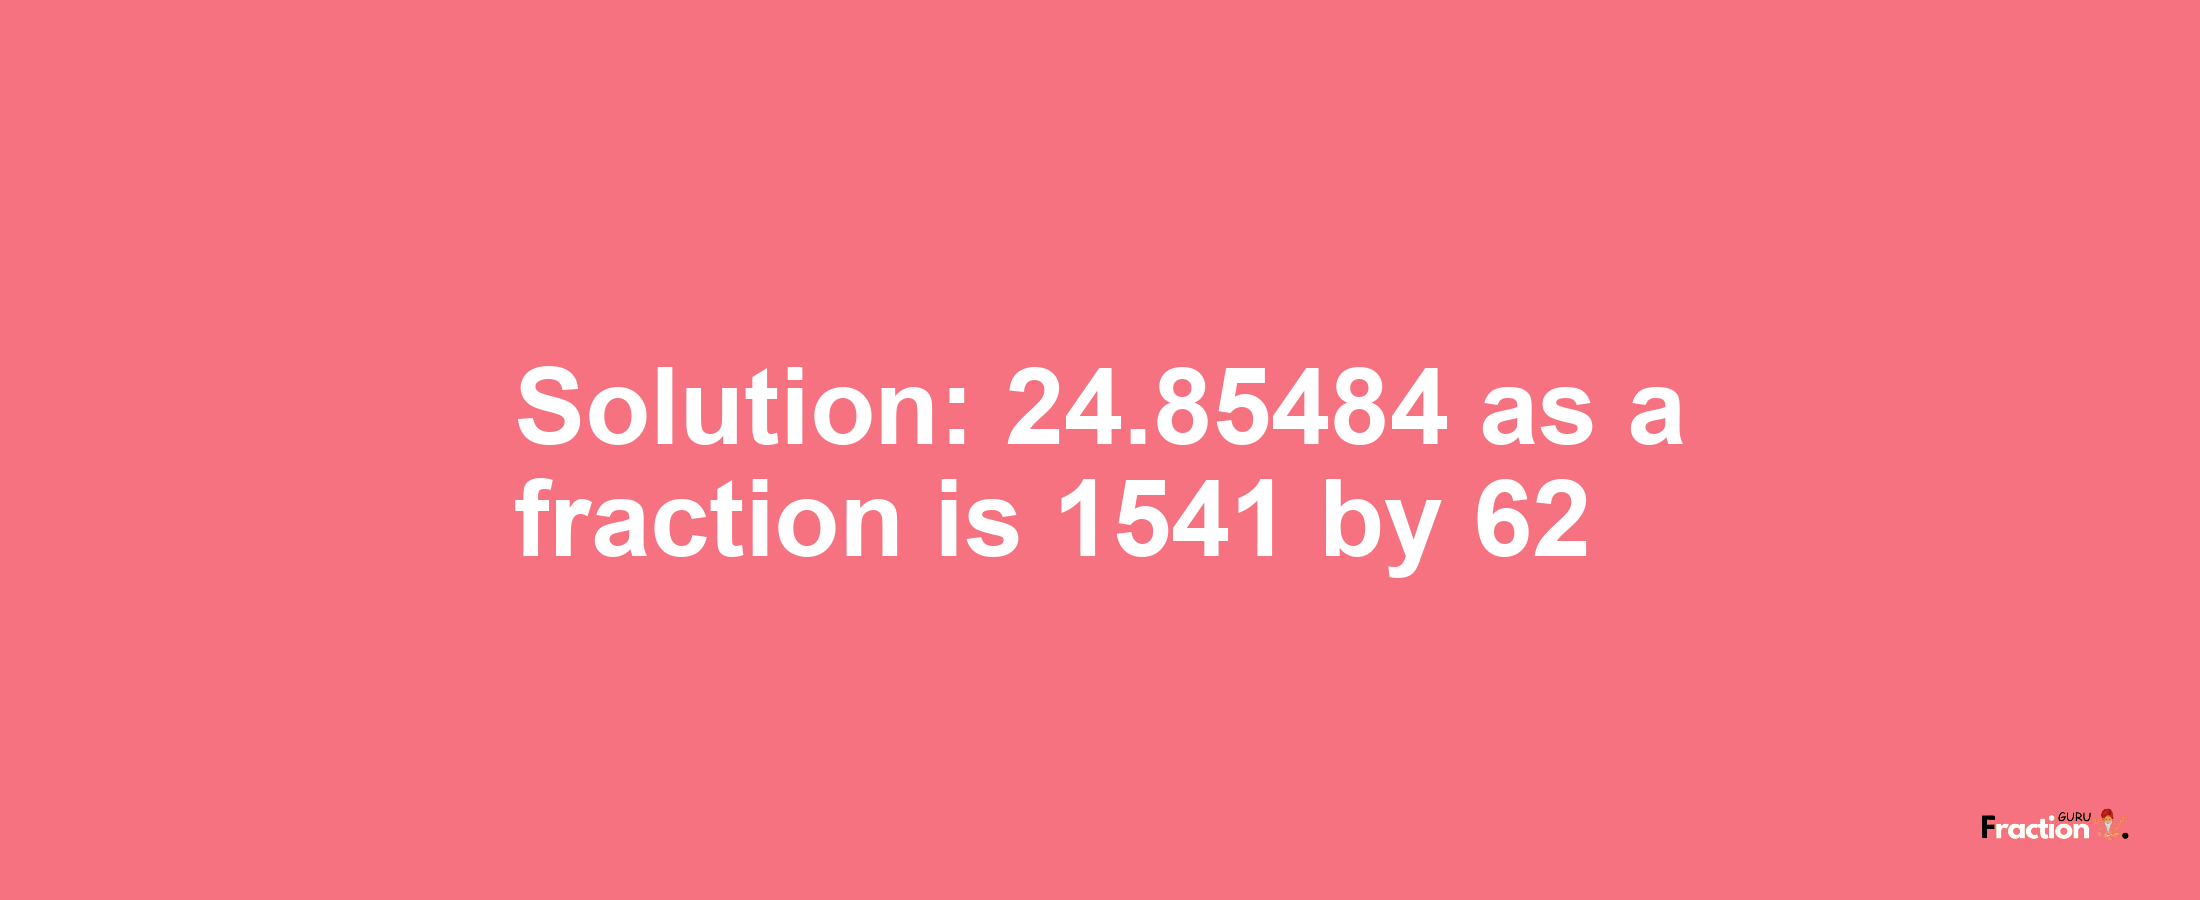 Solution:24.85484 as a fraction is 1541/62